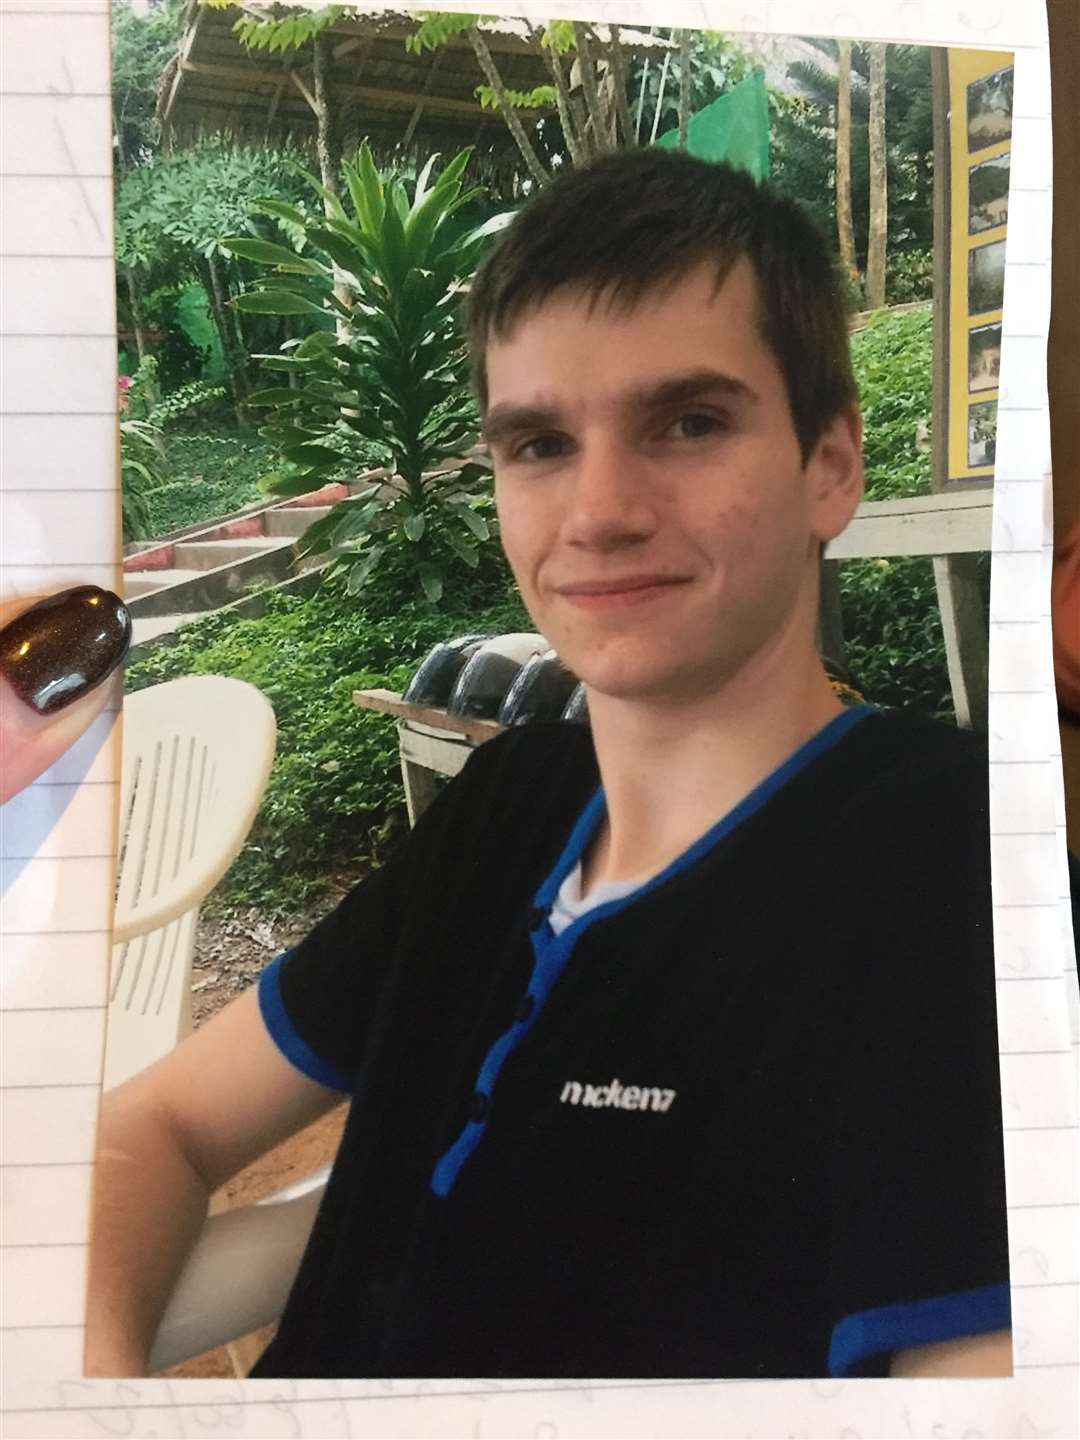 Daniel Whitworth from Gravesend was among Stephen Port's victims